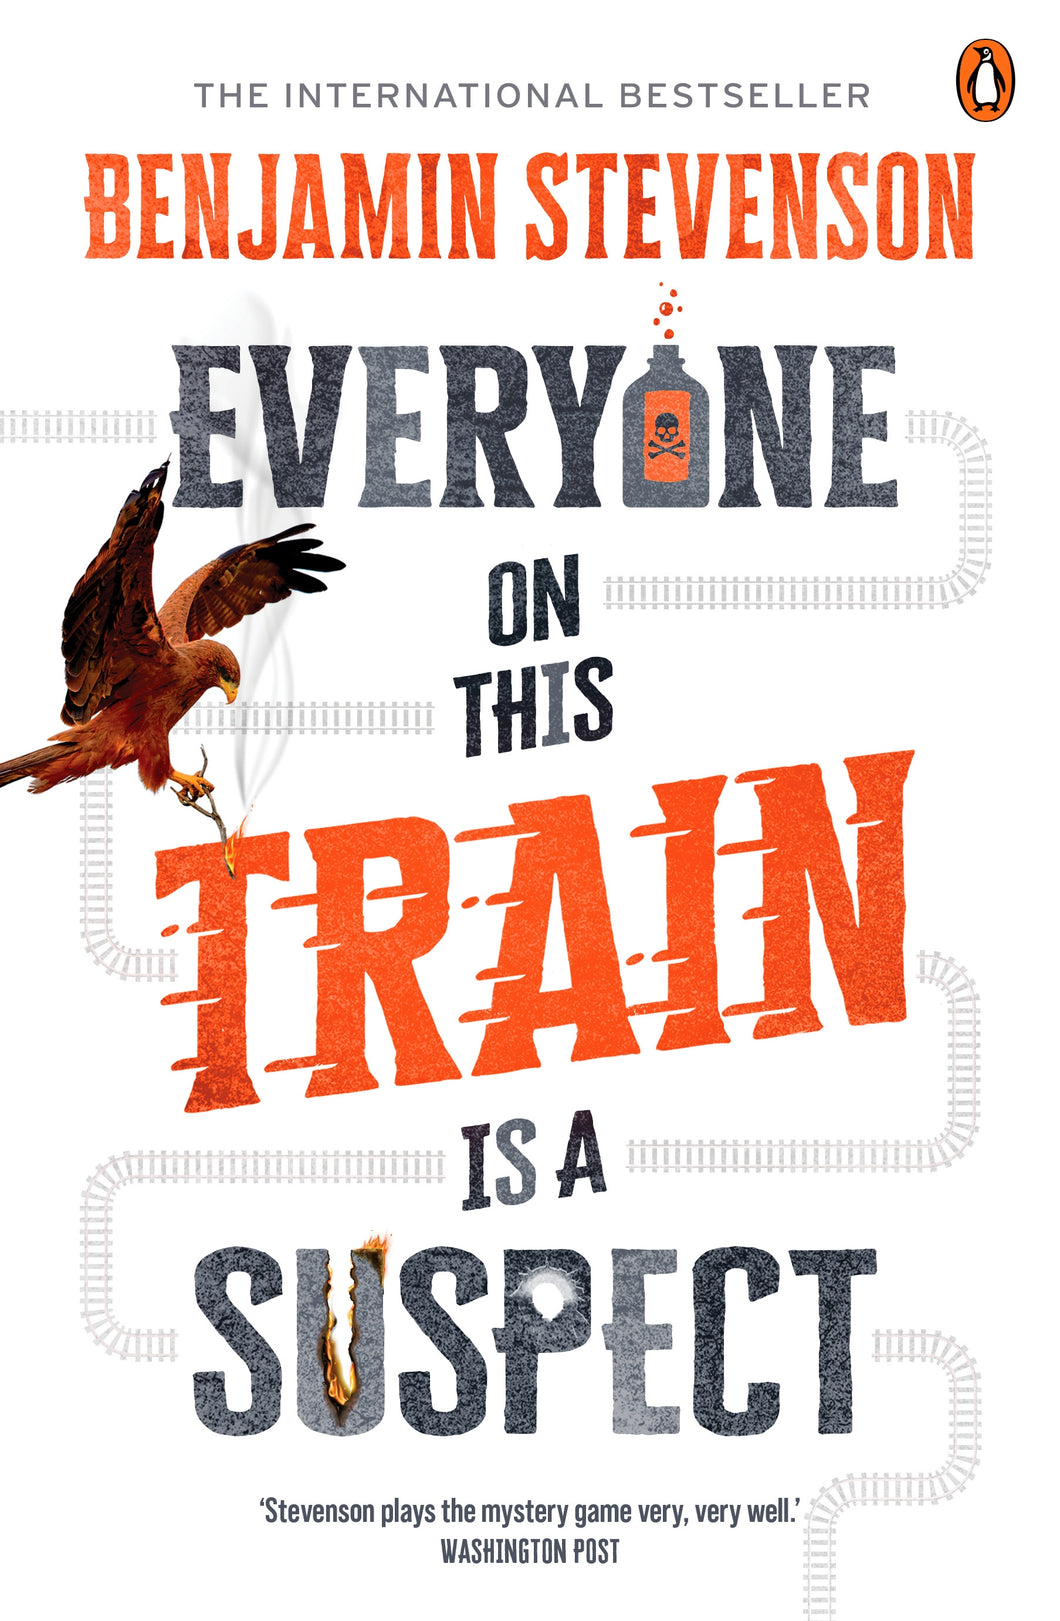 Everyone on this Train is a Suspect by Benjamin Stevenson